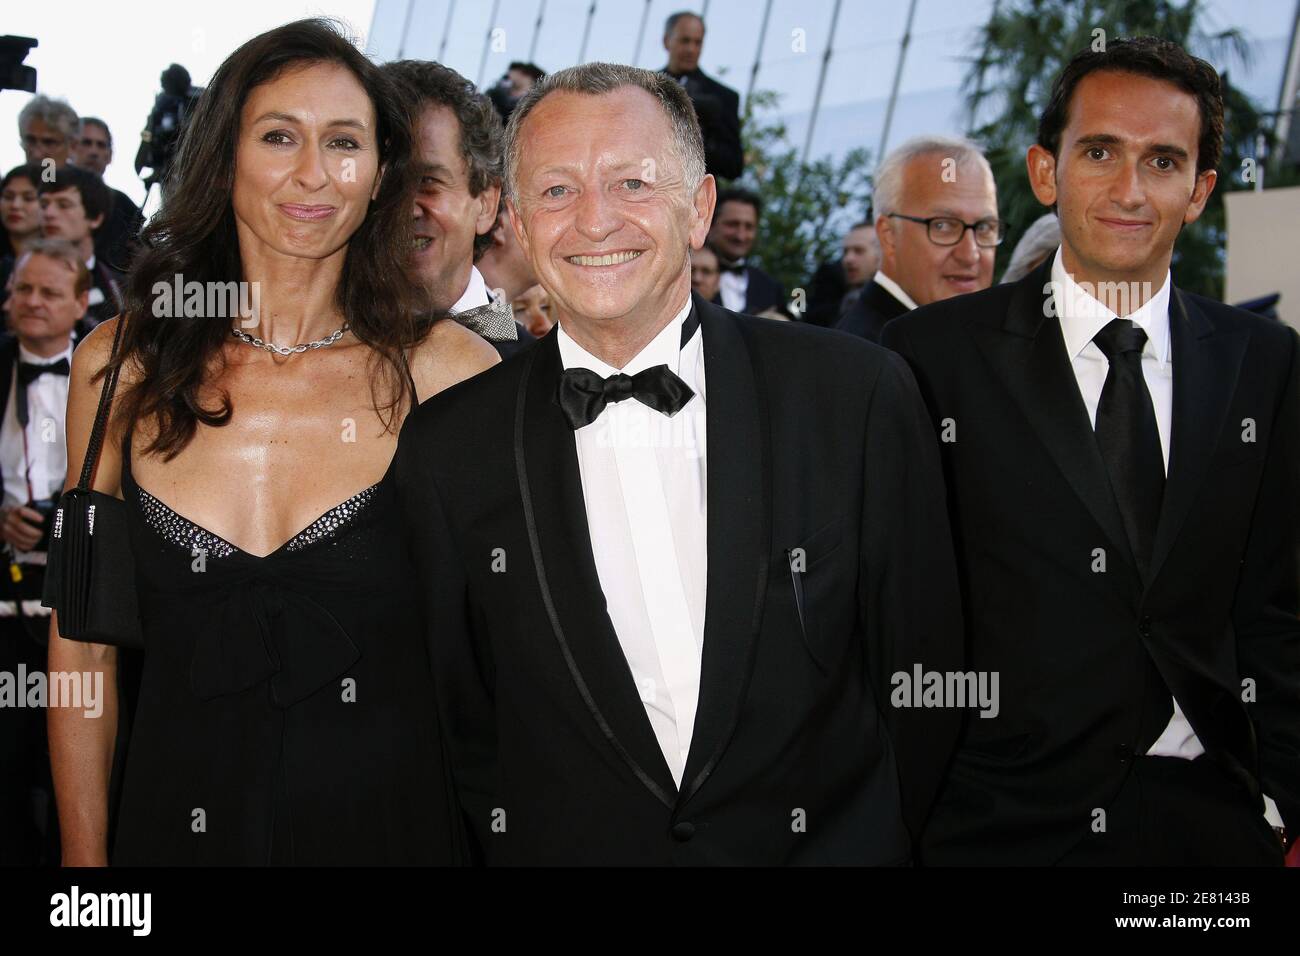 Michel Aulas with Wife and Son arrives at the Palais des Festivals for the  screening of the film 'Zodiac' directed by David Fincher presented in  competition at the 60th International Film Festival